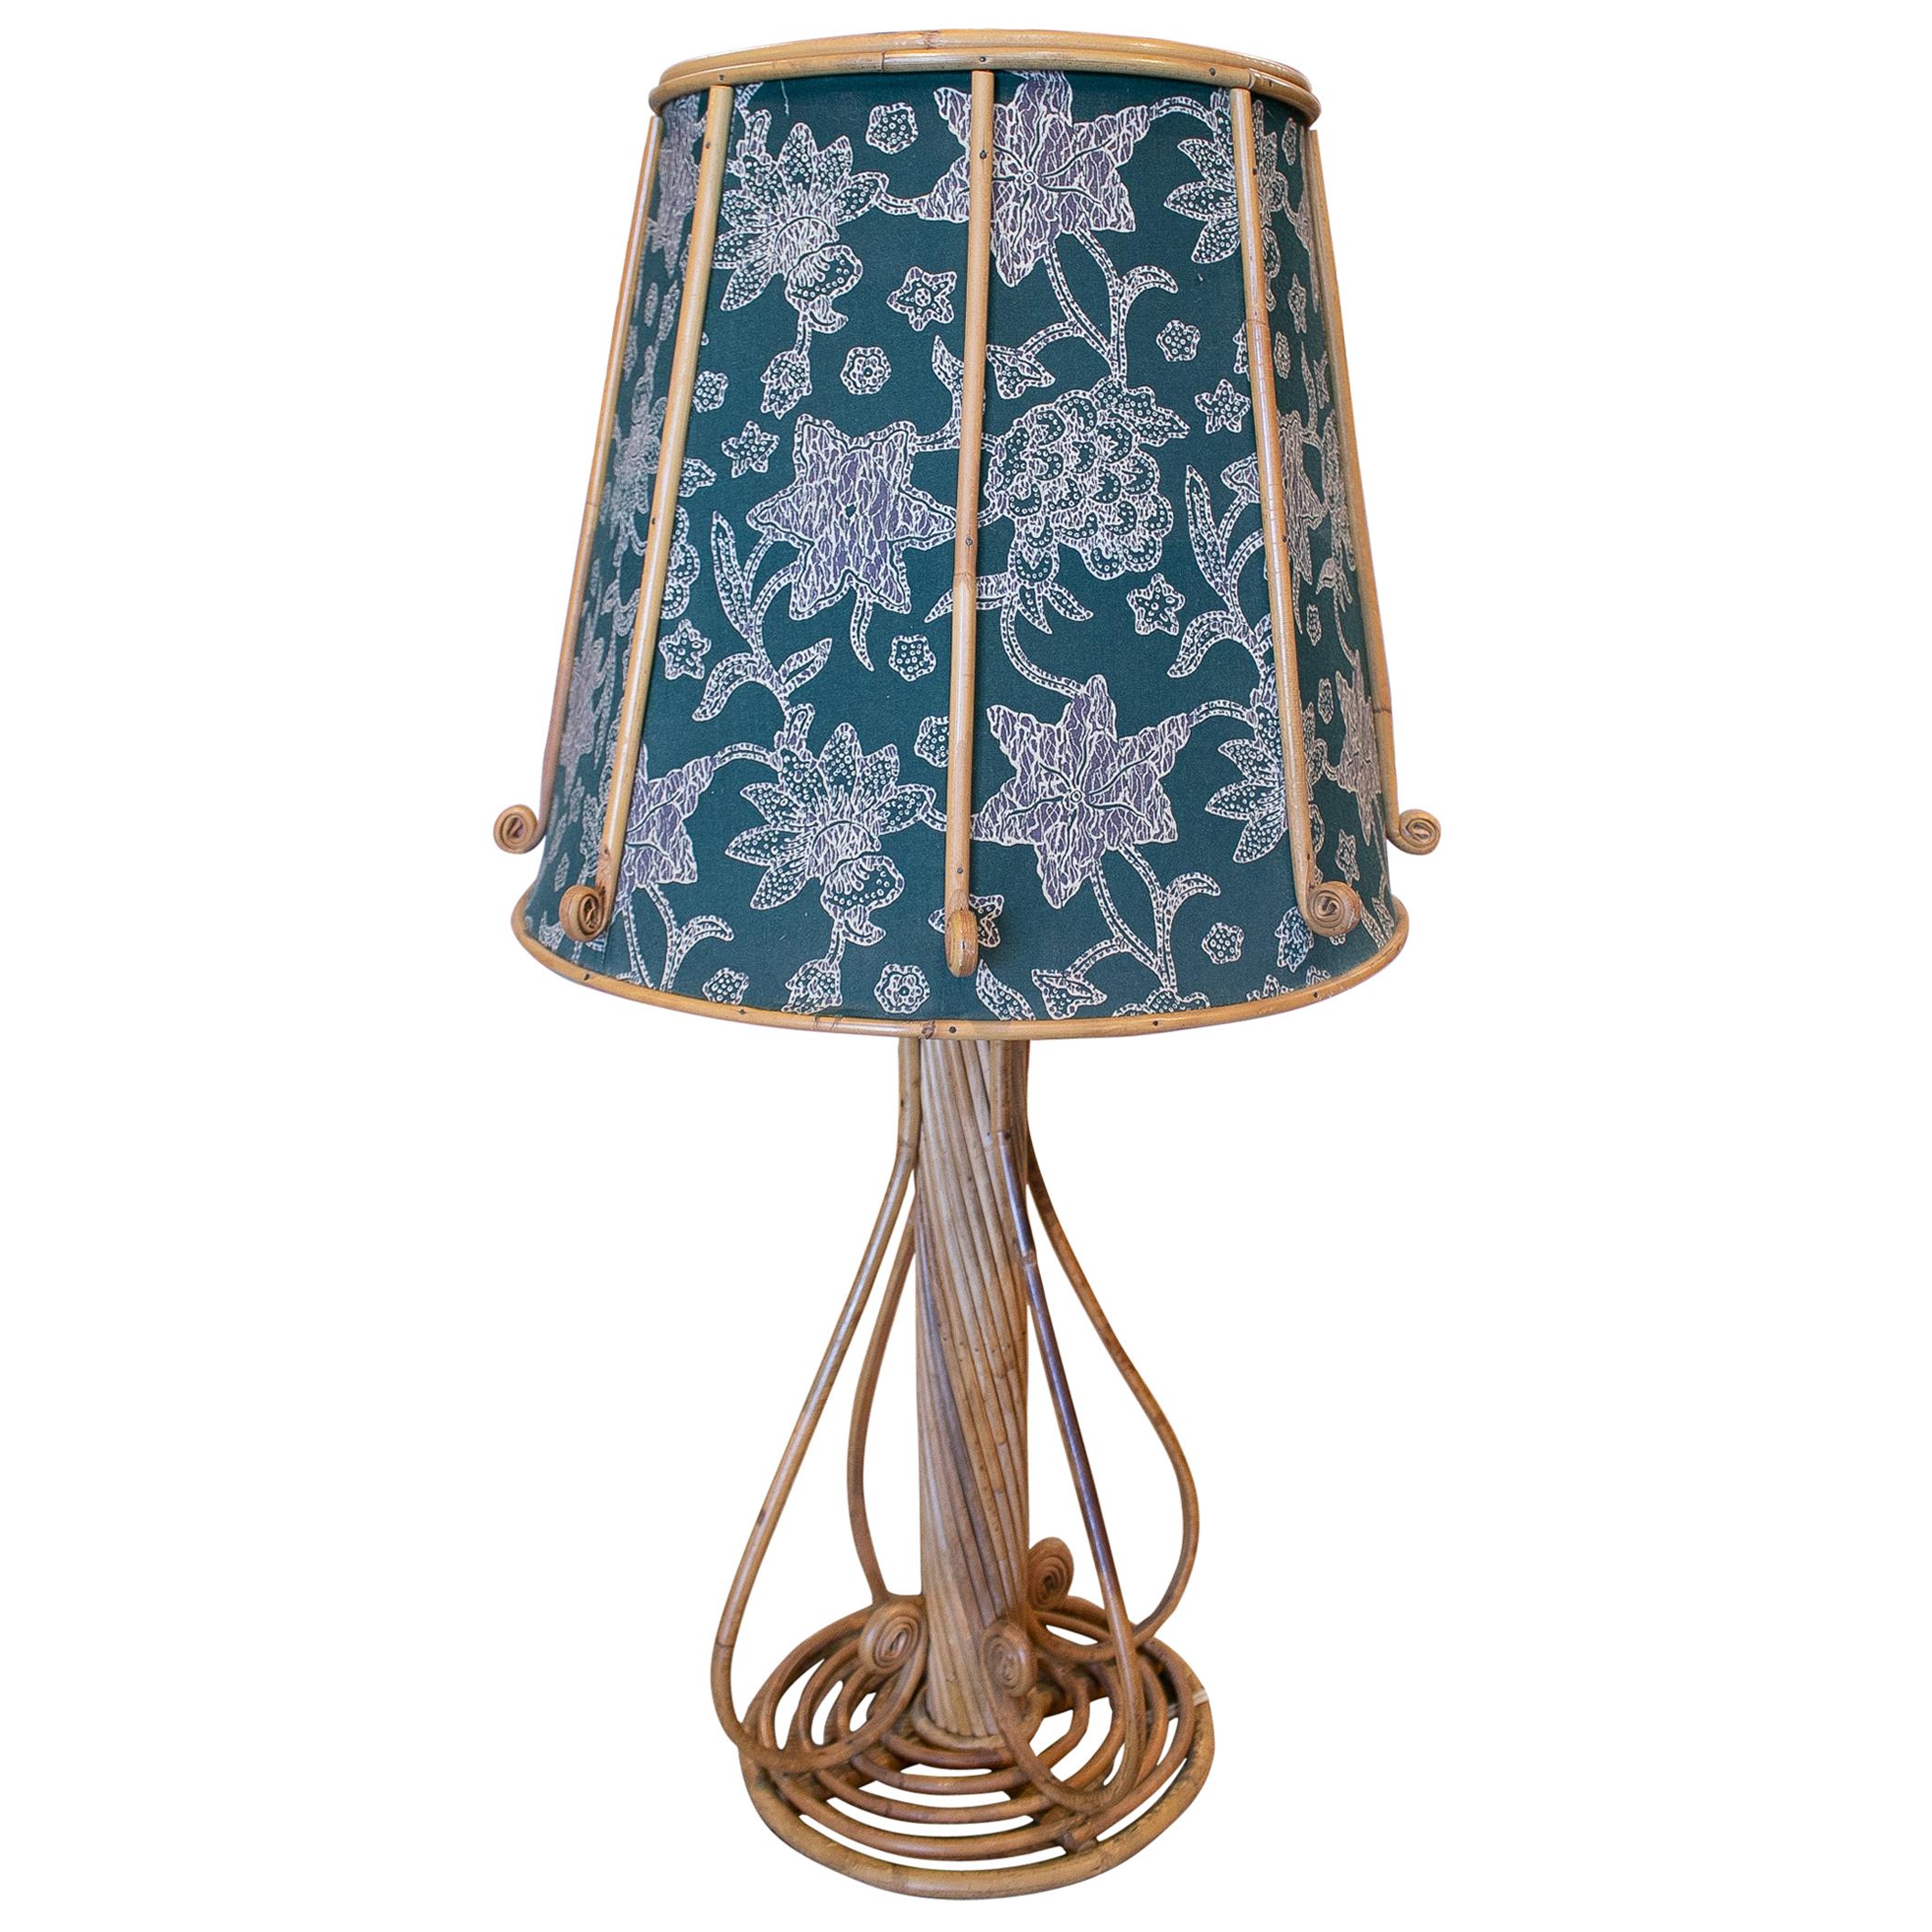 1970s Spanish Wicker Table Lamp with Upholstered Shade